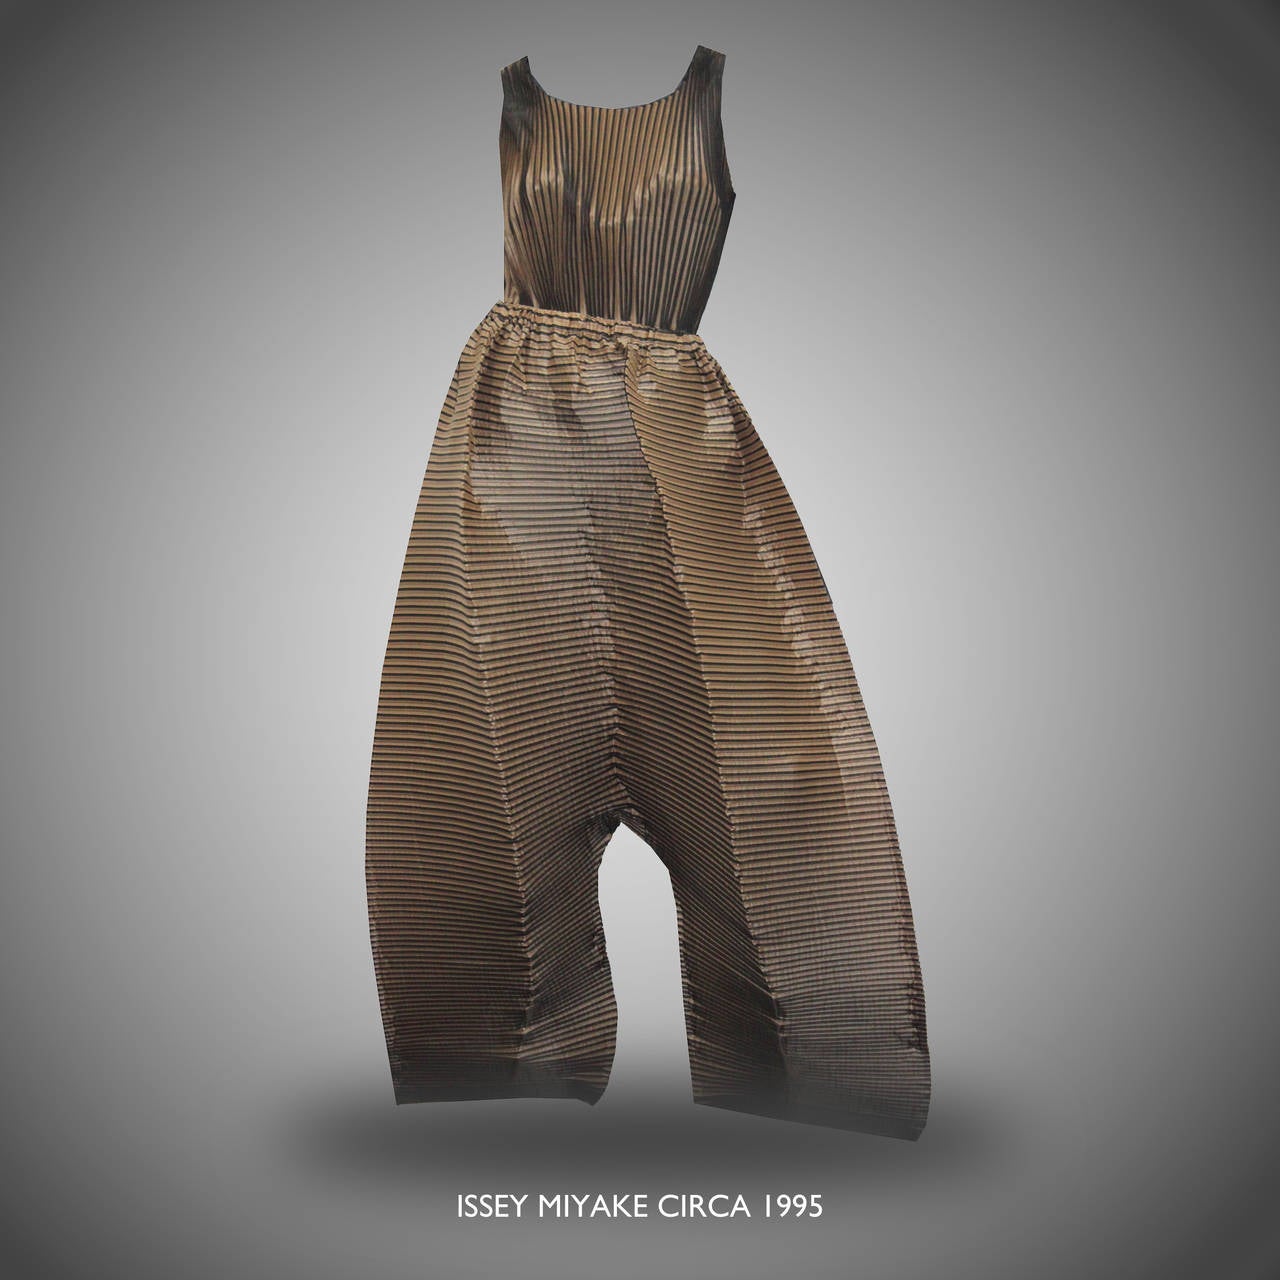 A rare Issey Miyake trouser suit, circa 1995. The suit features a pleated vest and super wide 3-D pleated trousers. The two contrasting colours are olive green and beige. 

Size Small

The trousers have an elasticated waist band and can either